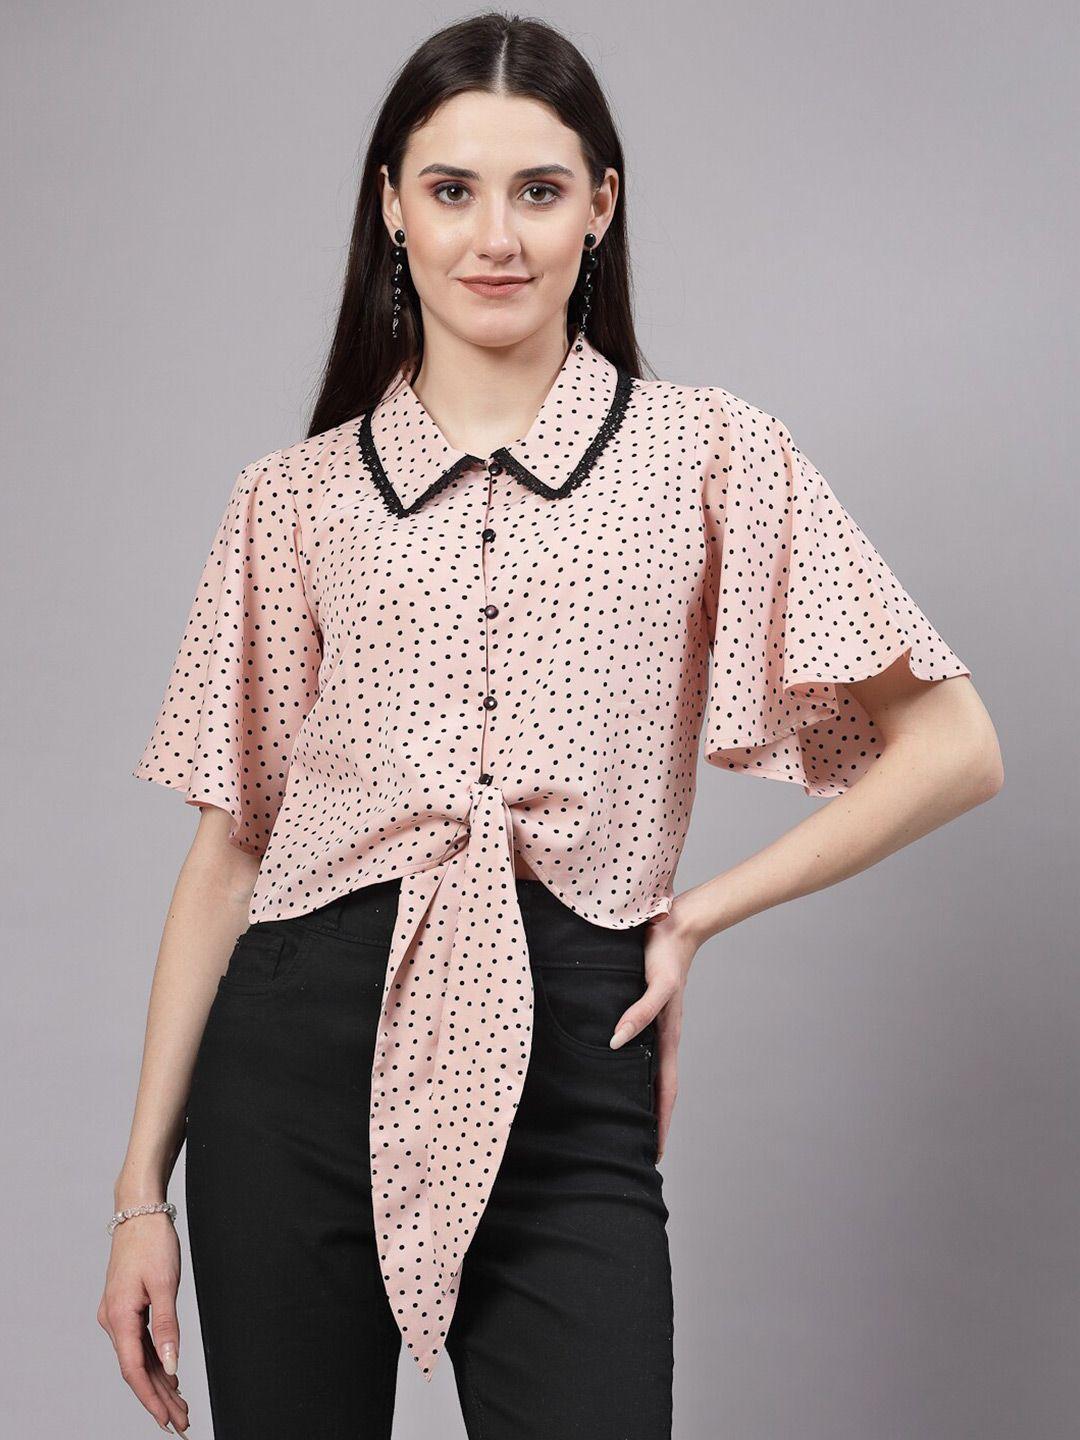 style-quotient-nude-coloured-&-black-polka-dot-print-peter-pan-collar-bell-sleeve-top